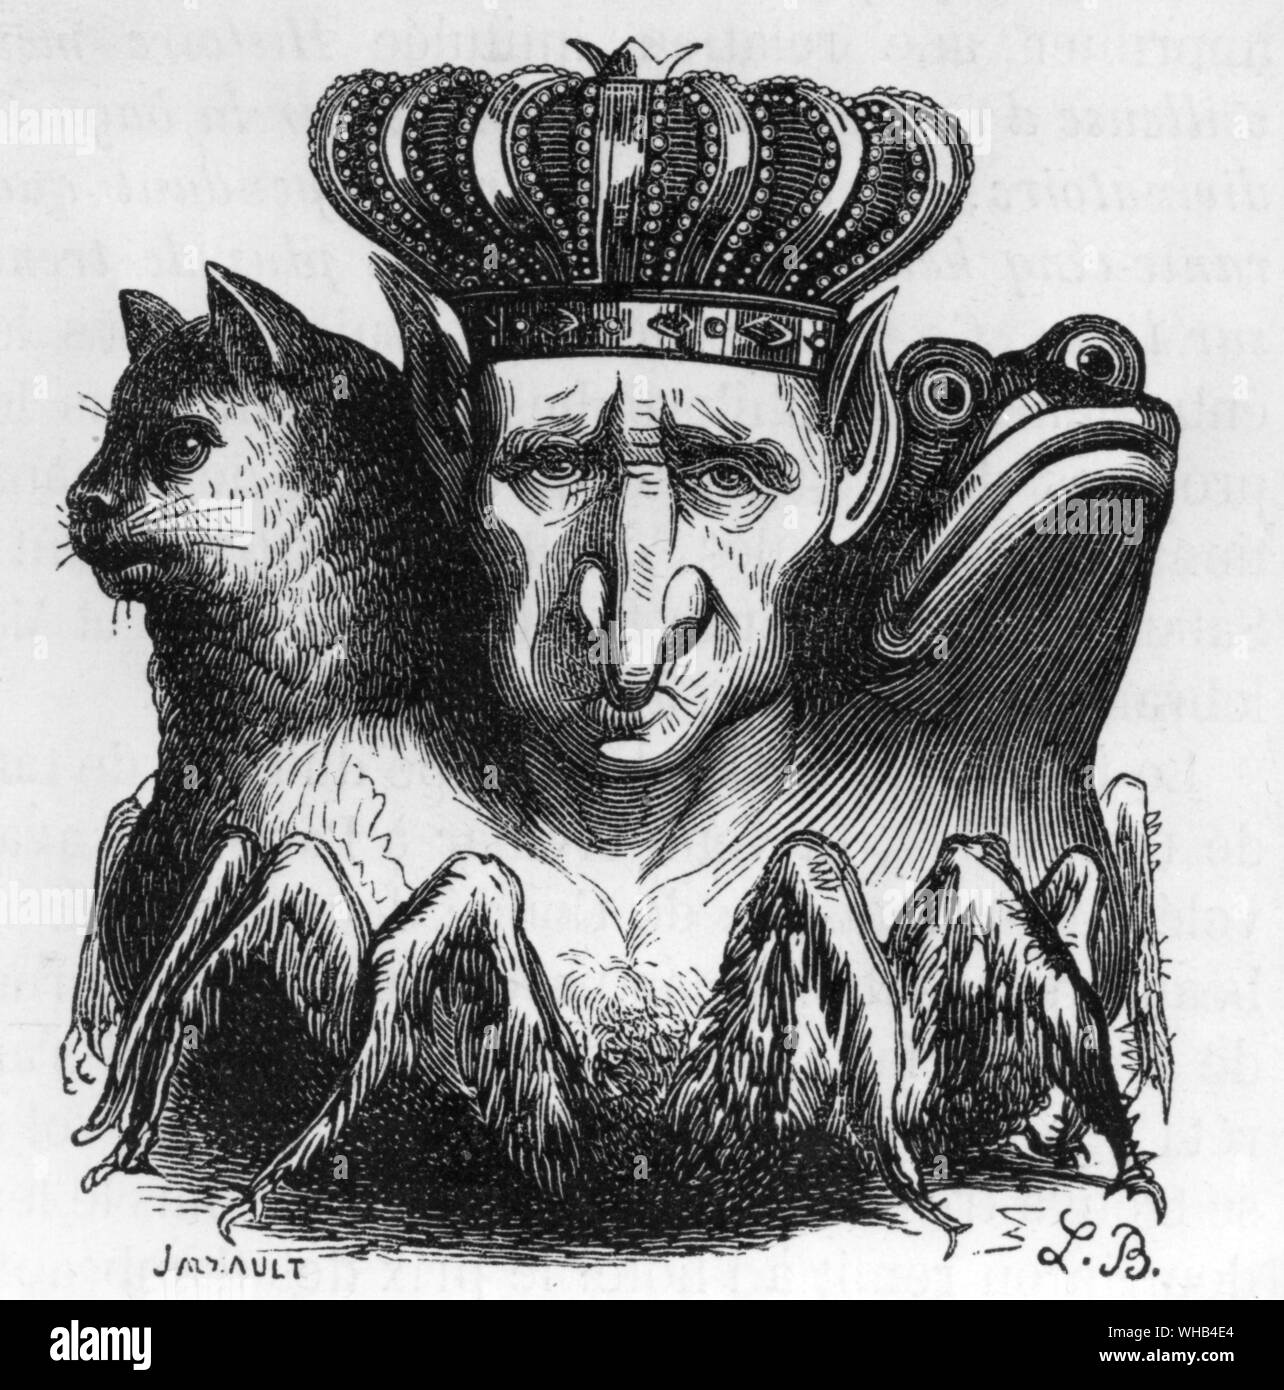 The Demon Baal by L. Breton -. A Judeo-Christian demon whose name also refers to various gods and goddesses who are not demons.. Stock Photo